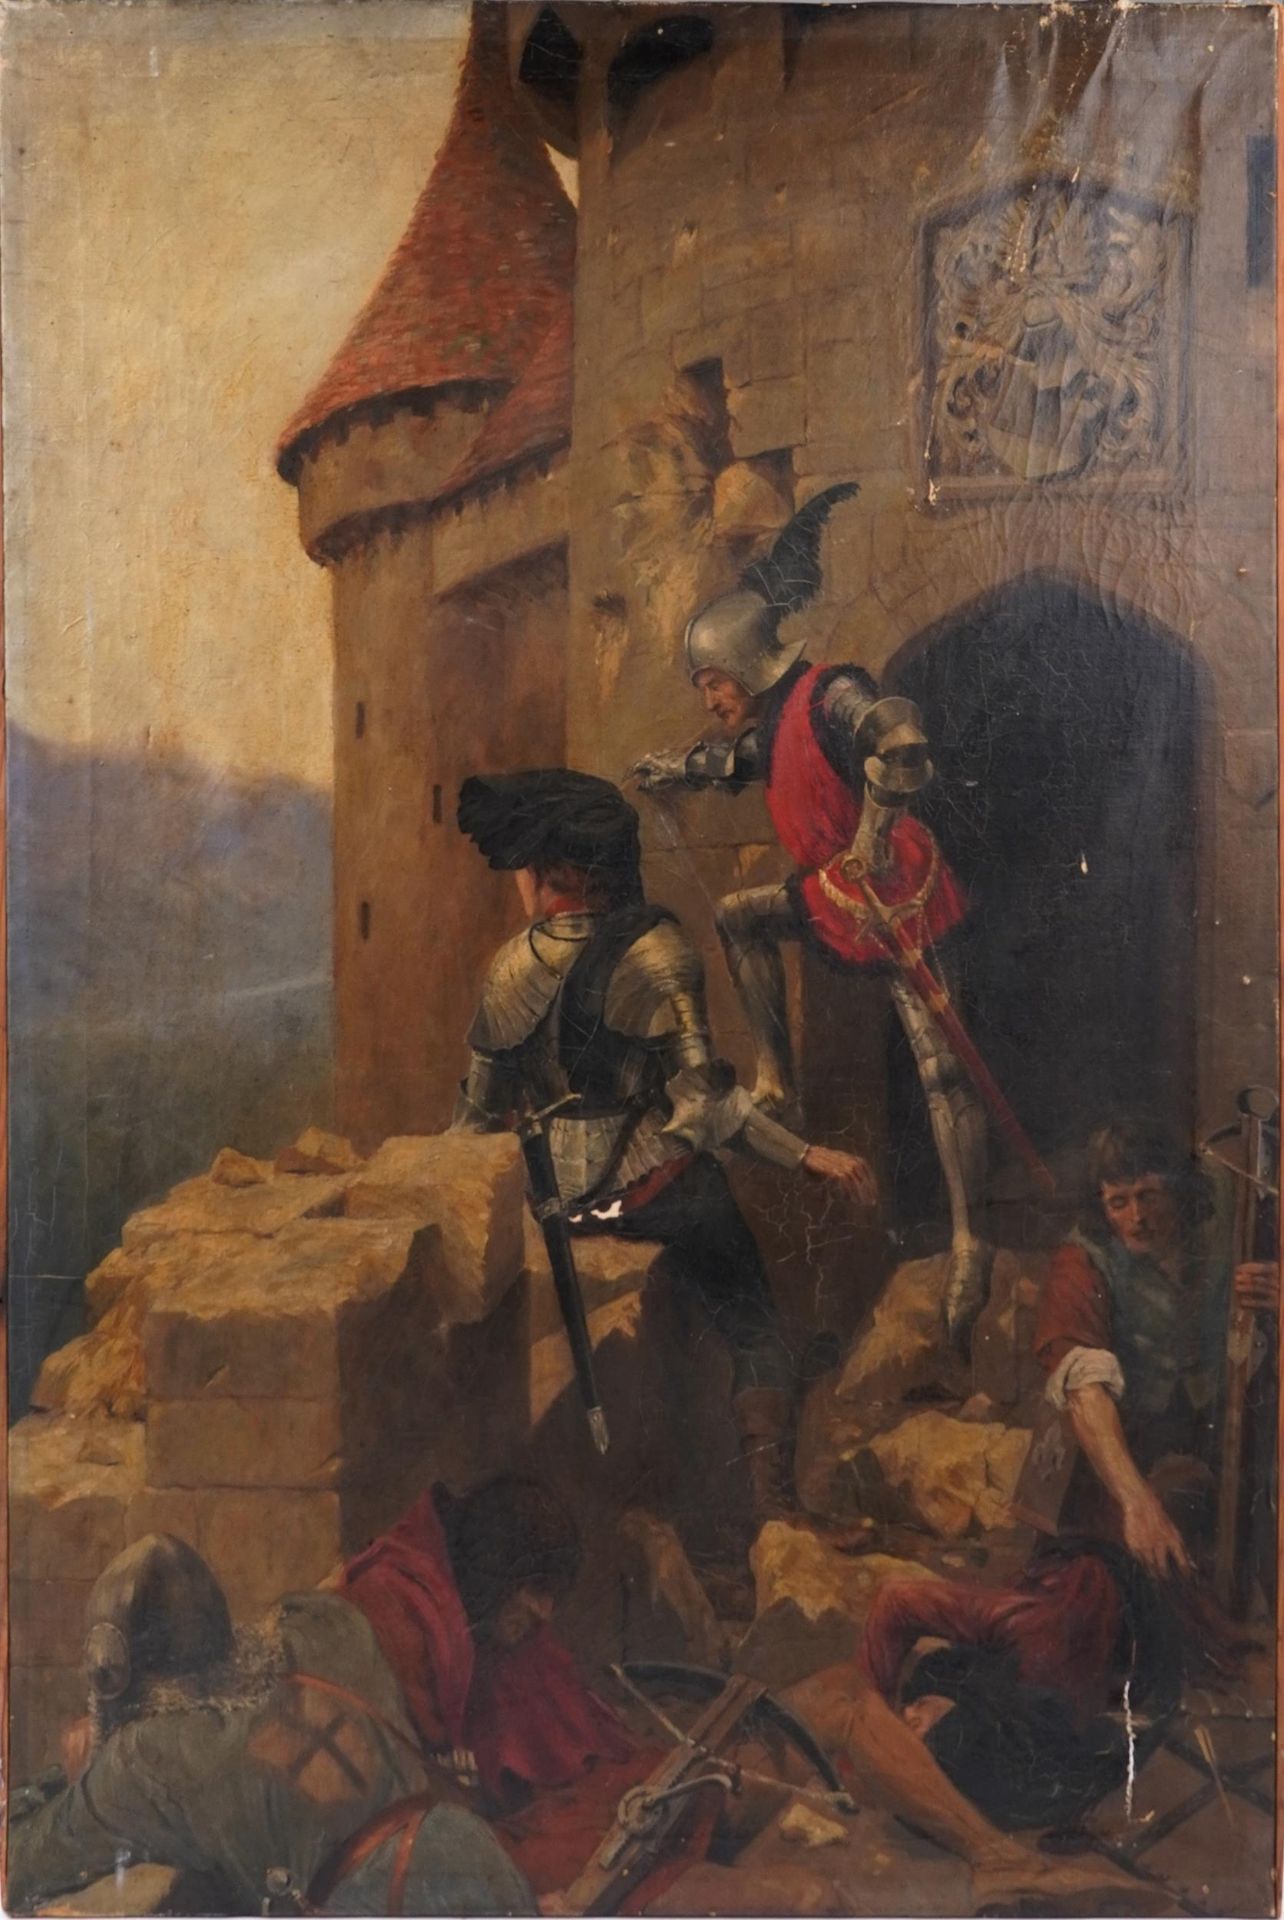 A C Woodville - Medieval knights with swords and crossbows, antique oil on canvas, unframed, 106cm x